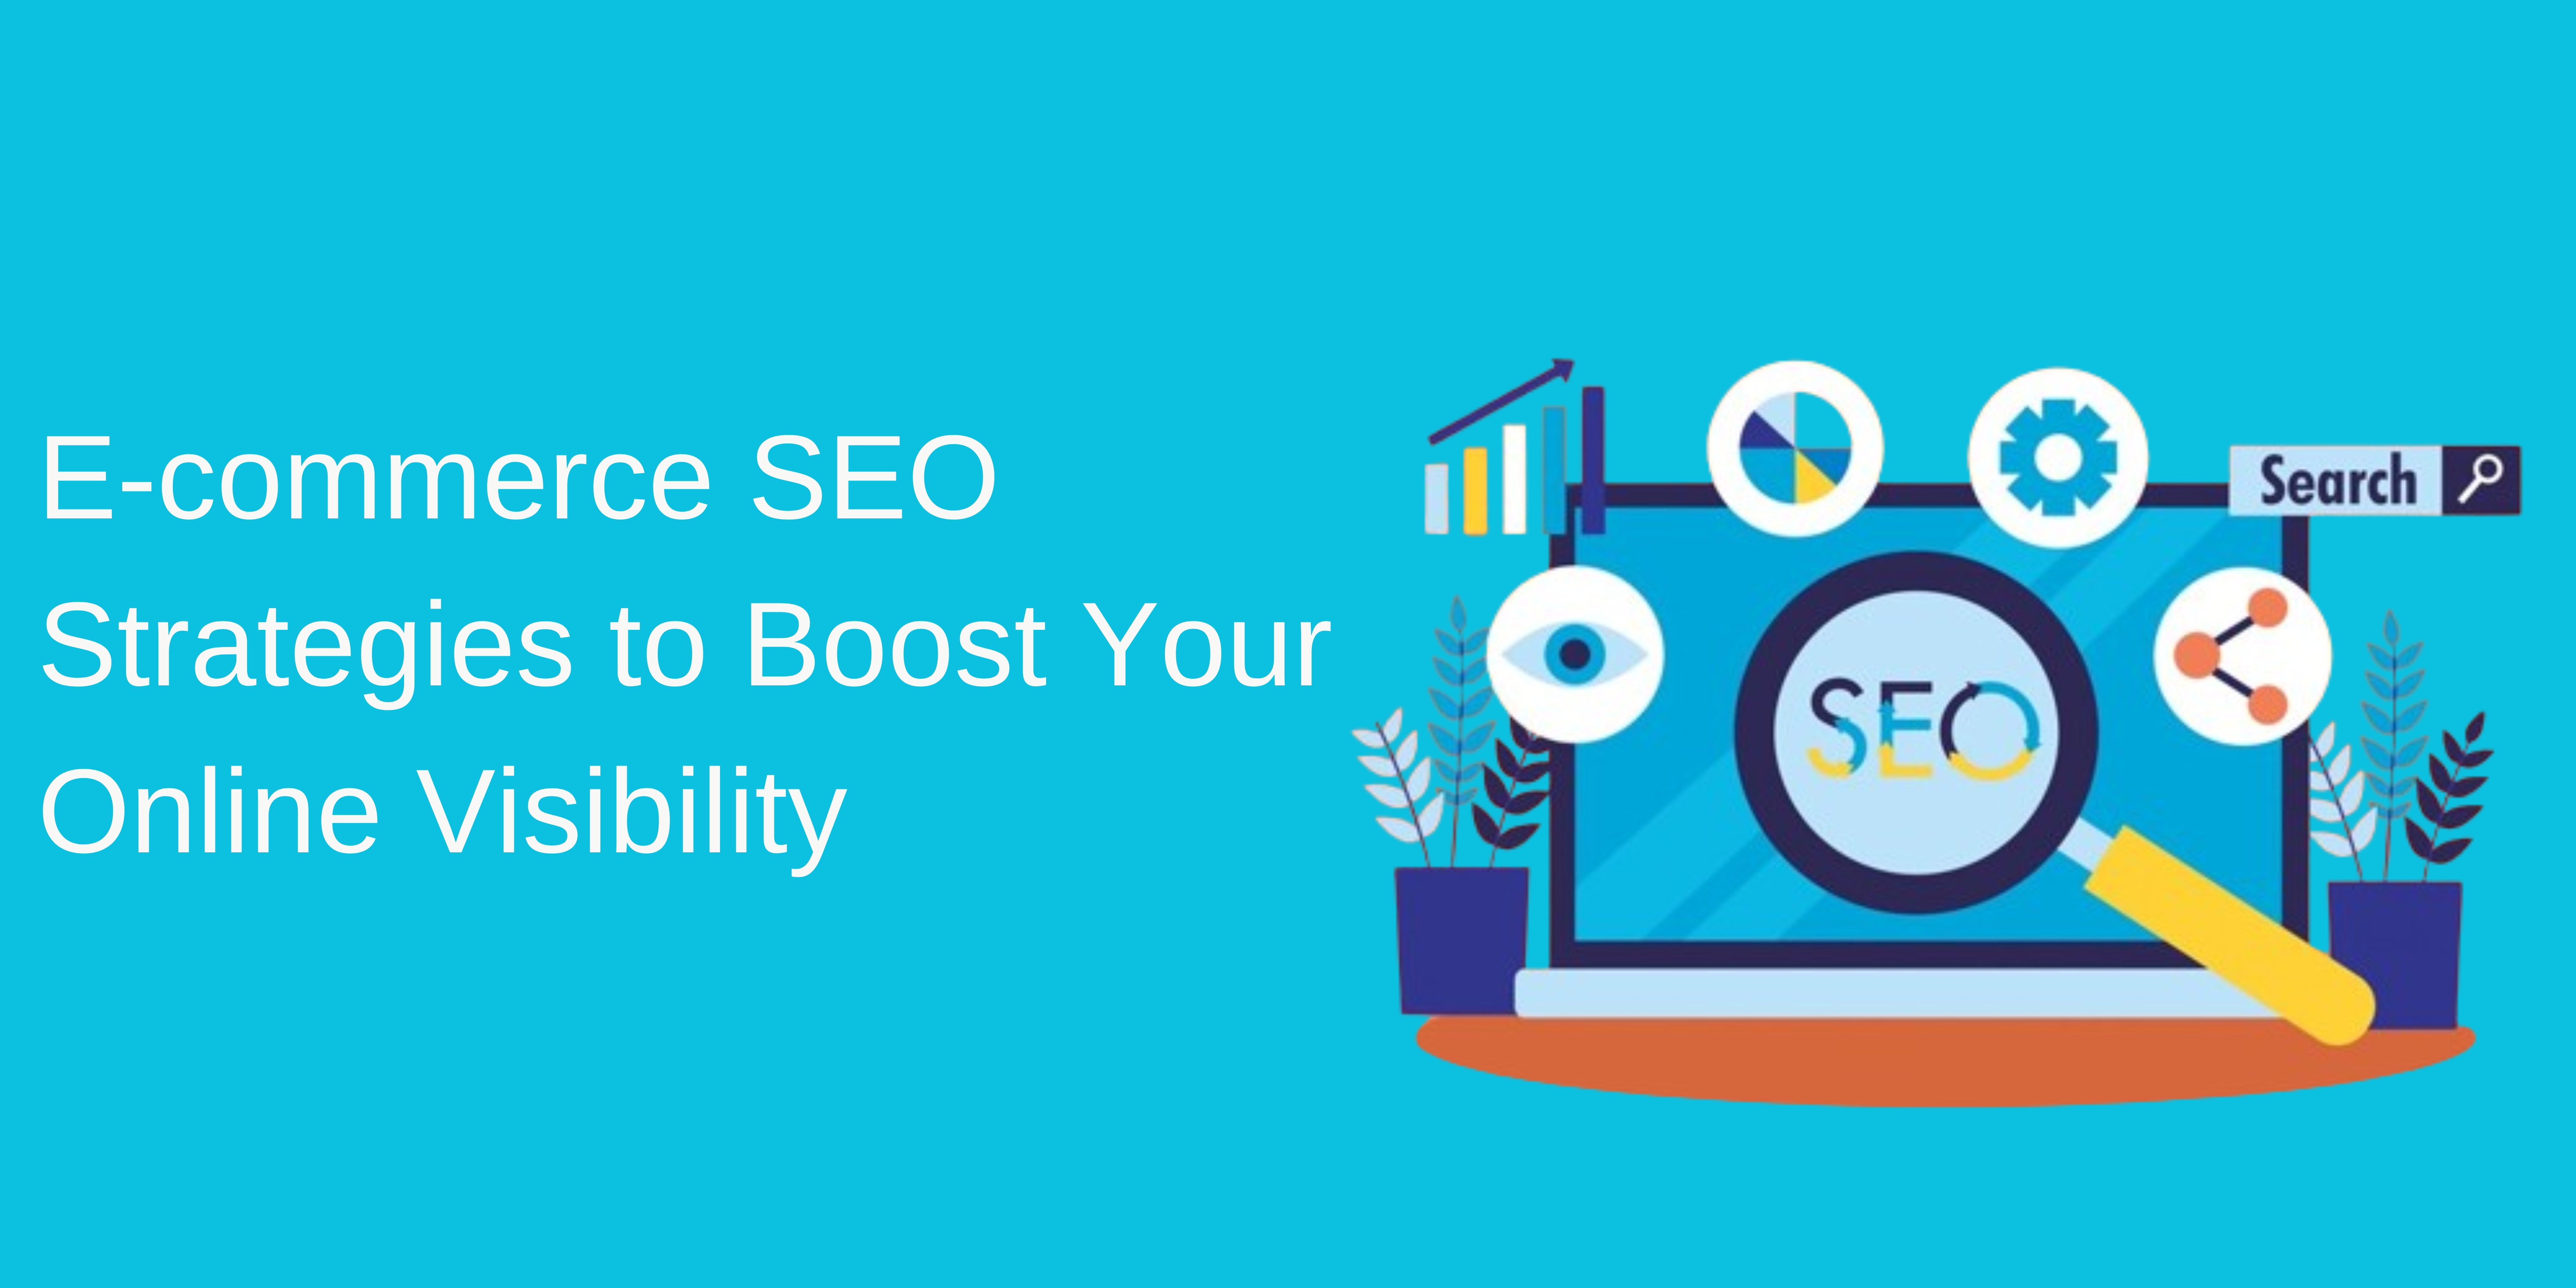 You are currently viewing E-commerce SEO Strategies to Boost Your Online Visibility